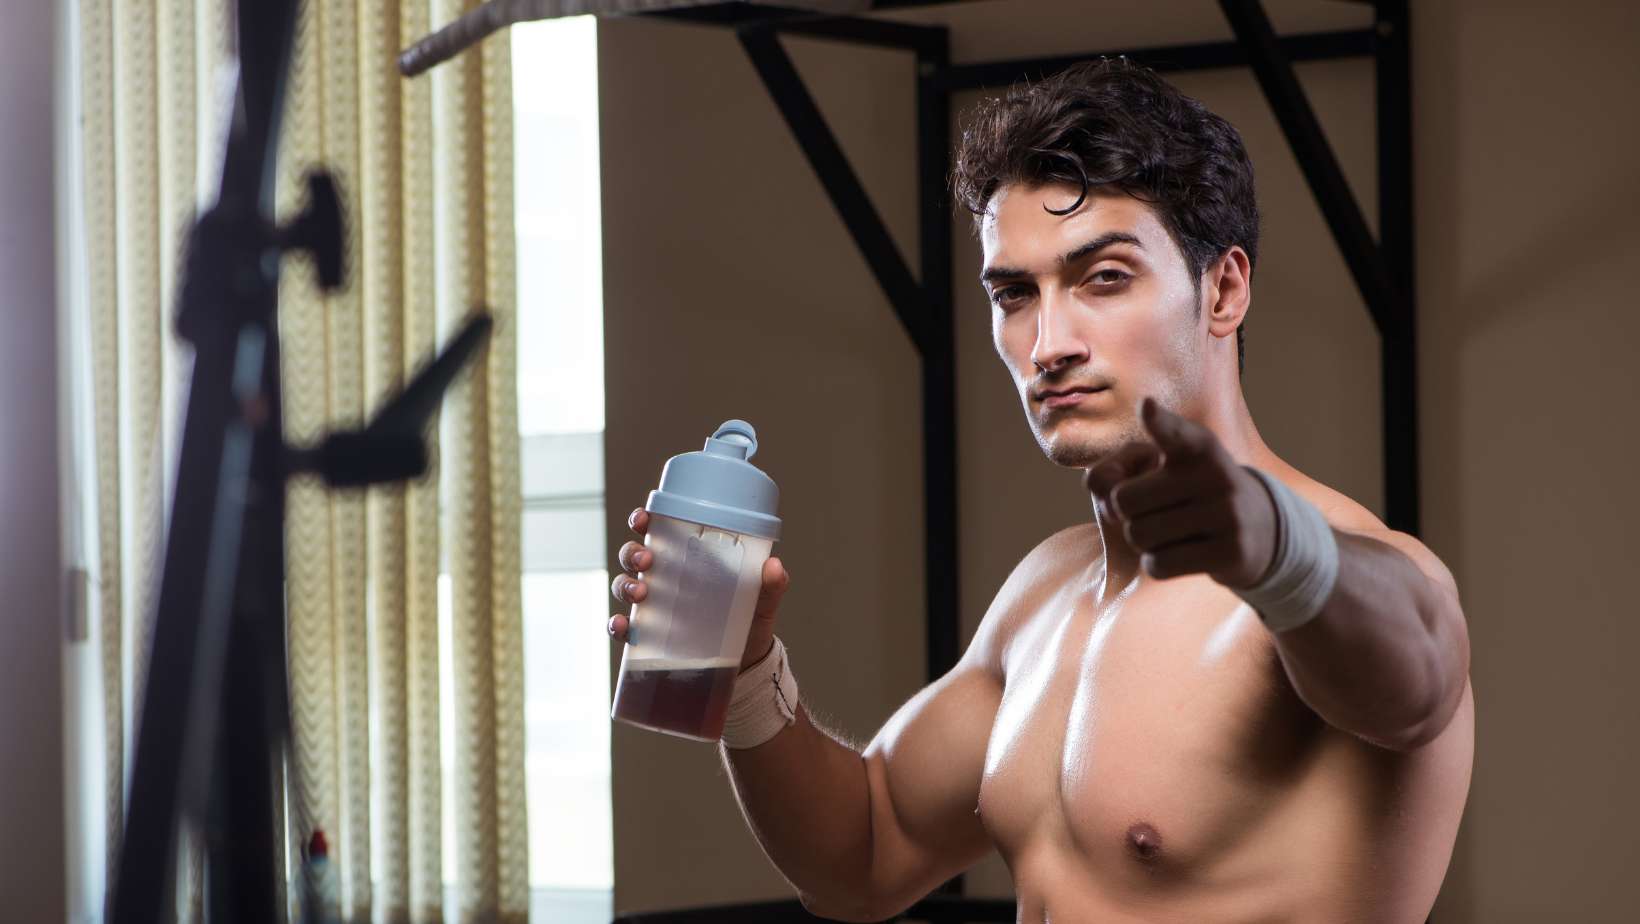 Man with Nutrient Supplements in Sports Gym